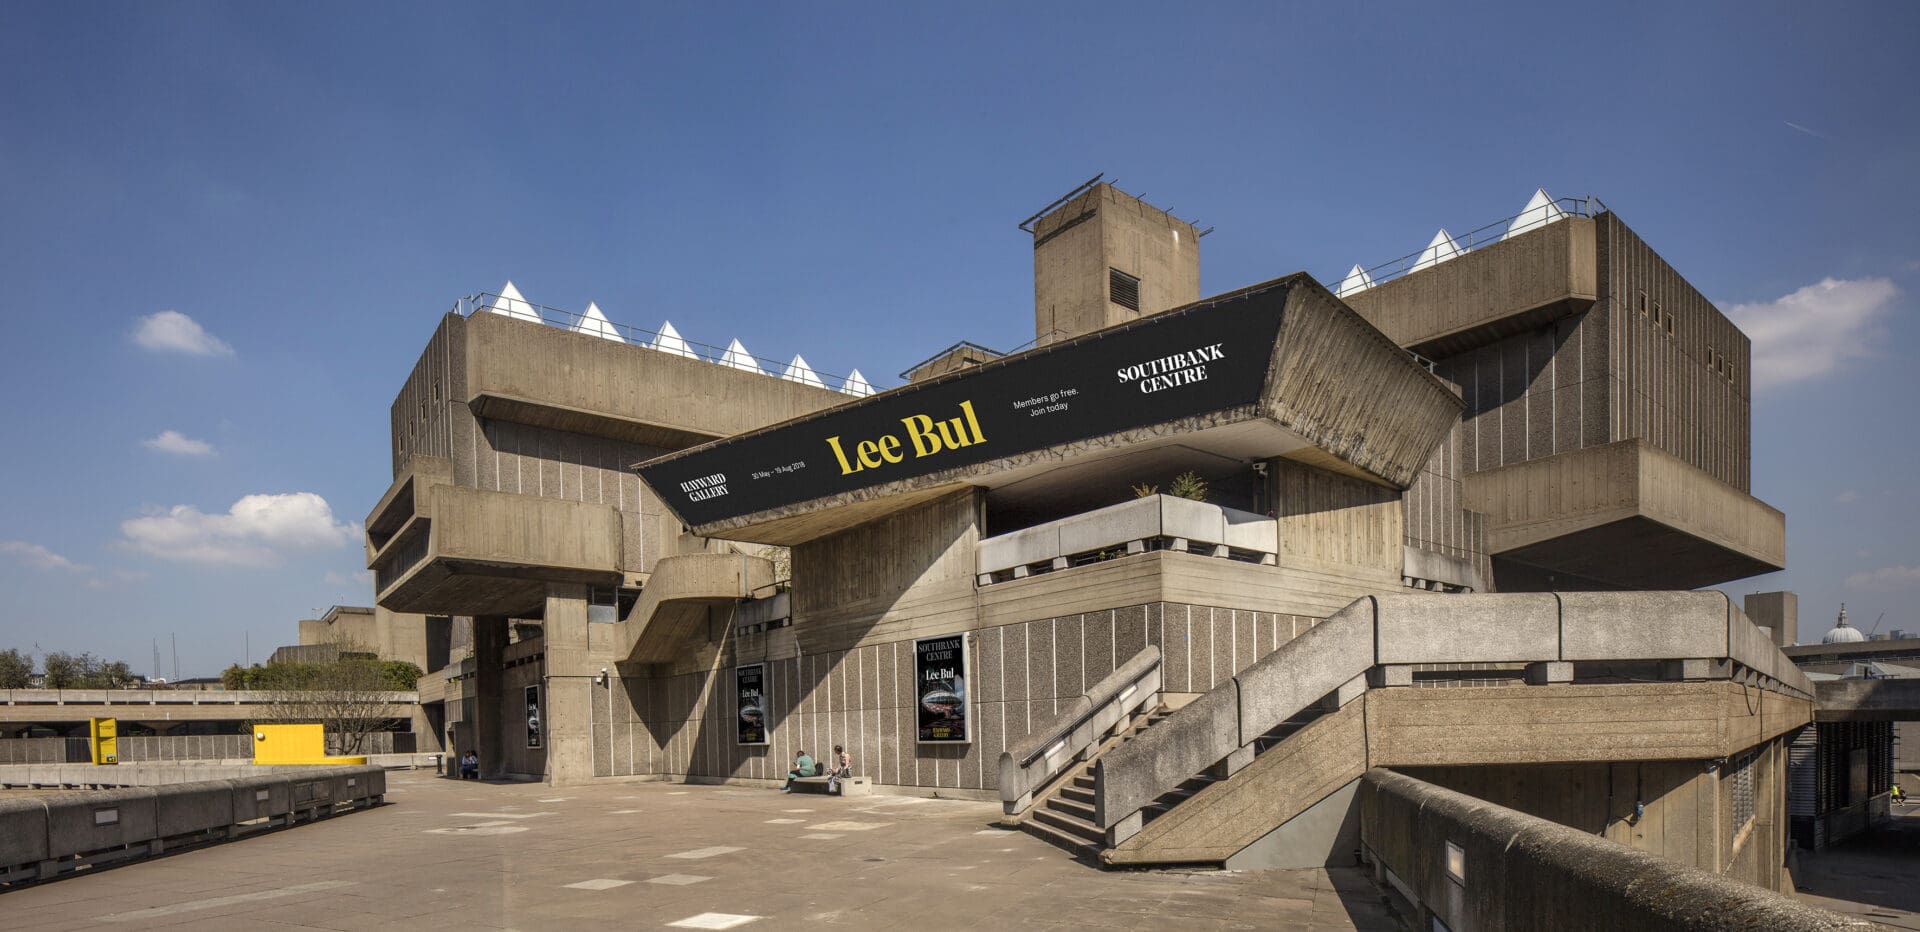 Best museums and galleries in London | A view of the outside of Hayward Gallery – part of the Southbank Centre in London.